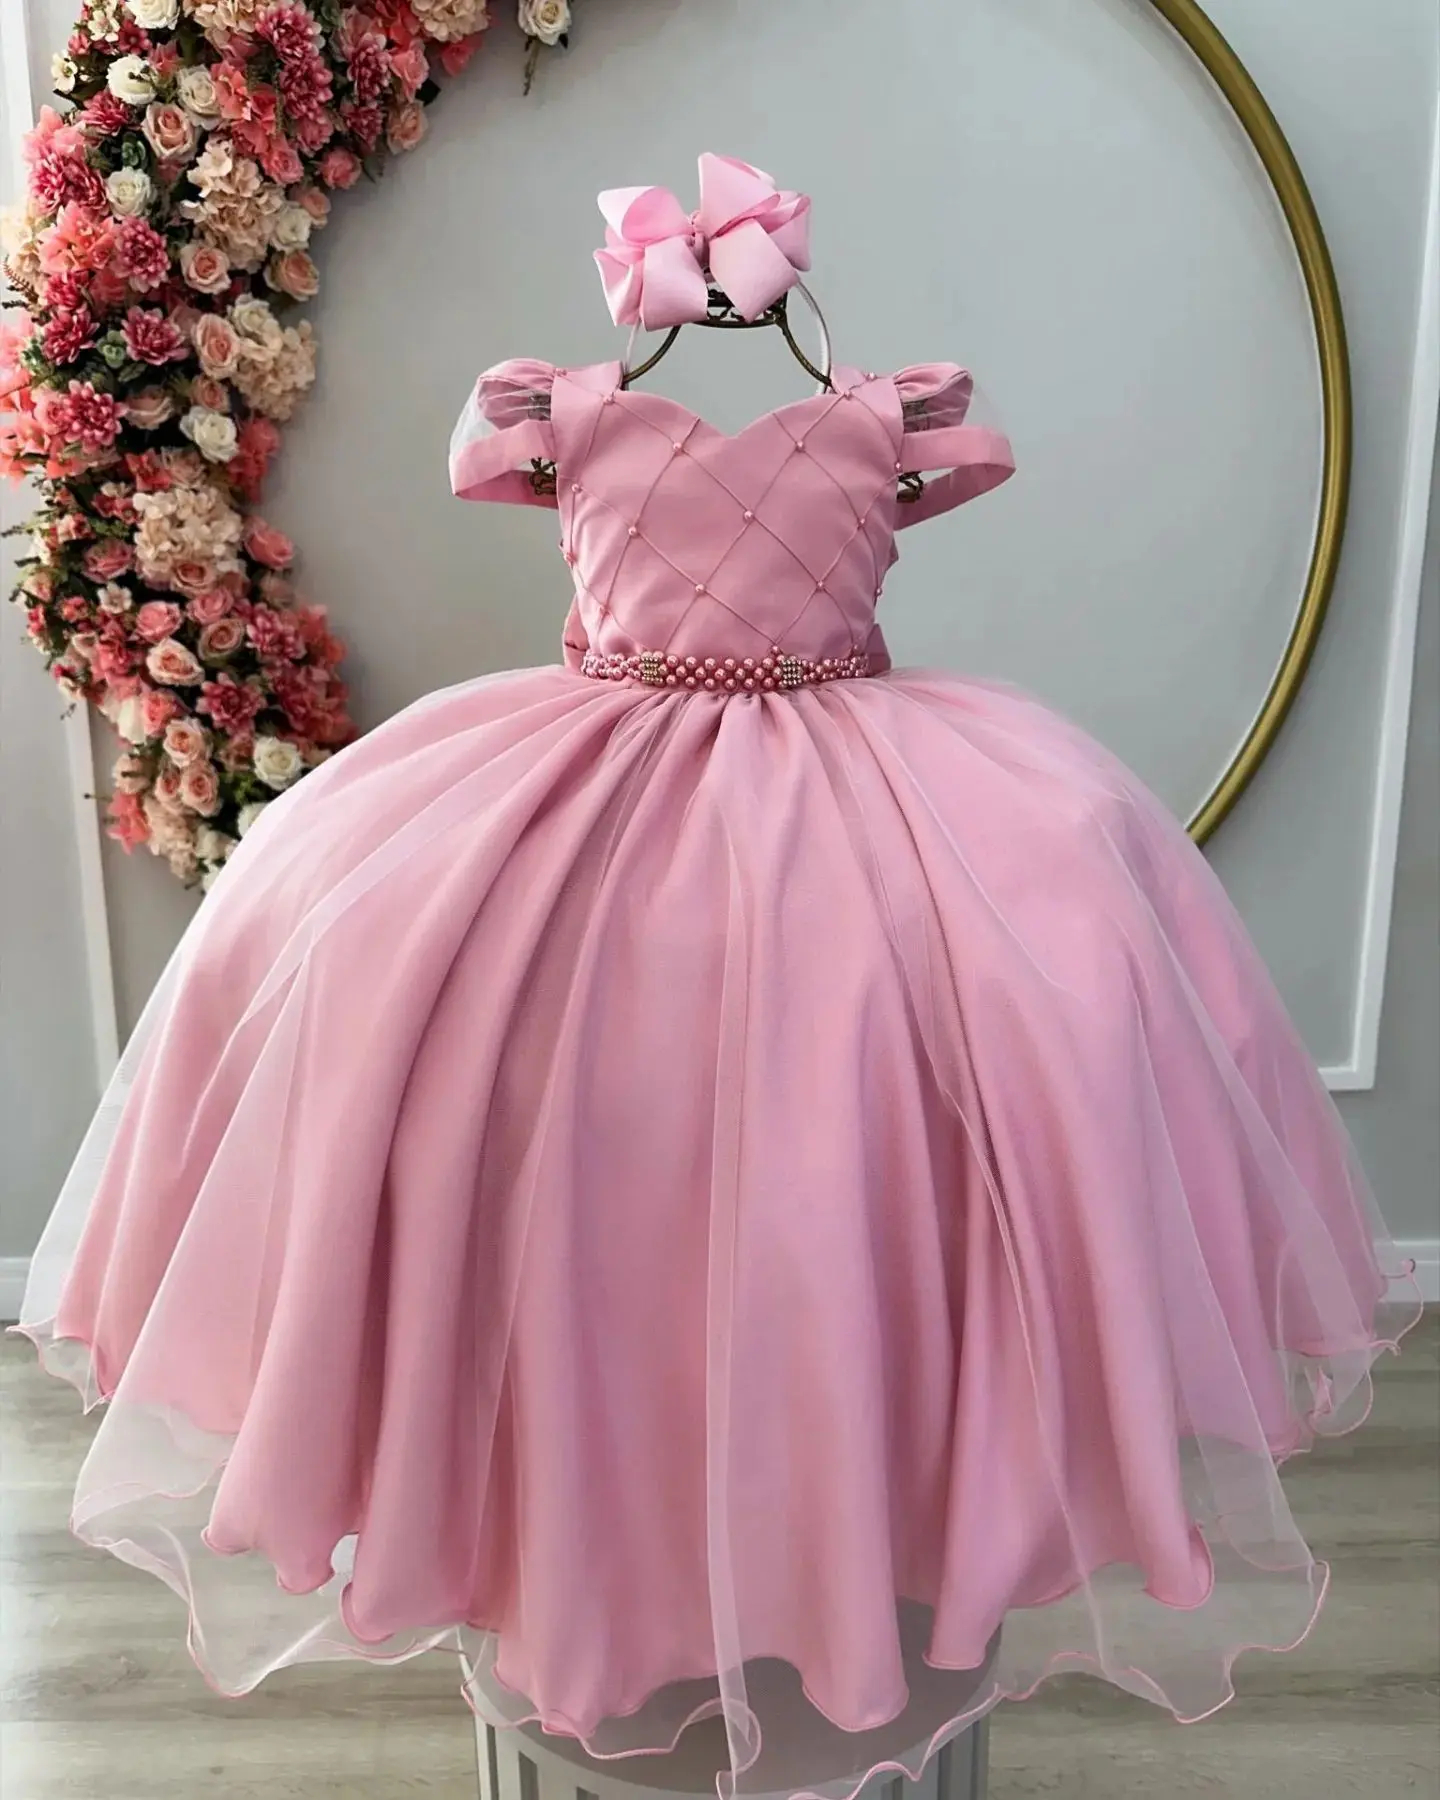 

Soft Satin Pink Ball Gown Flower Girl Dresses for Wedding Beads Children Pageant Gowns Bows Kids First communion Dresses